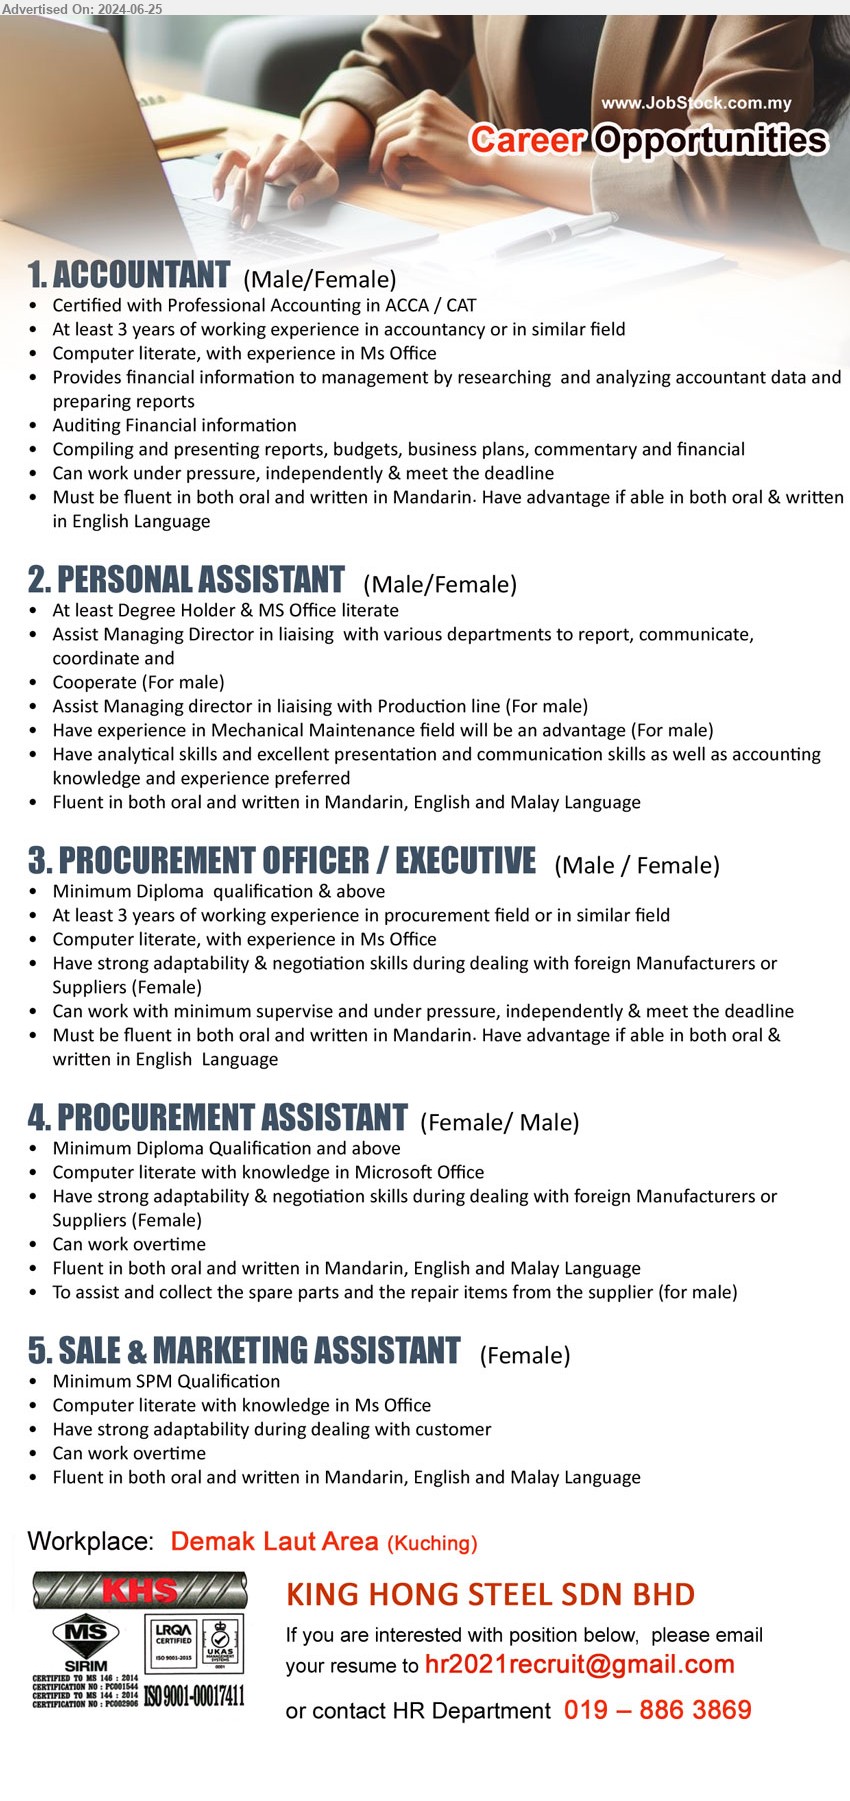 KING HONG STEEL SDN BHD - 1. ACCOUNTANT   (Kuching), Certified with Professional Accounting in ACCA / CAT, 3 yrs. exp.,...
2. PERSONAL ASSISTANT  (Kuching), Degree Holder & MS Office literate,...
3. PROCUREMENT OFFICER / EXECUTIVE (Kuching), Diploma, 3 yrs. exp., Computer literate, with experience in Ms Office,...
4. PROCUREMENT ASSISTANT (Kuching), Diploma, Computer literate with knowledge in Microsoft Office,...
5. SALE & MARKETING ASSISTANT (Kuching), SPM, Computer literate with knowledge in Ms Office,...
Call 019–8863869 / Email resume to ...
